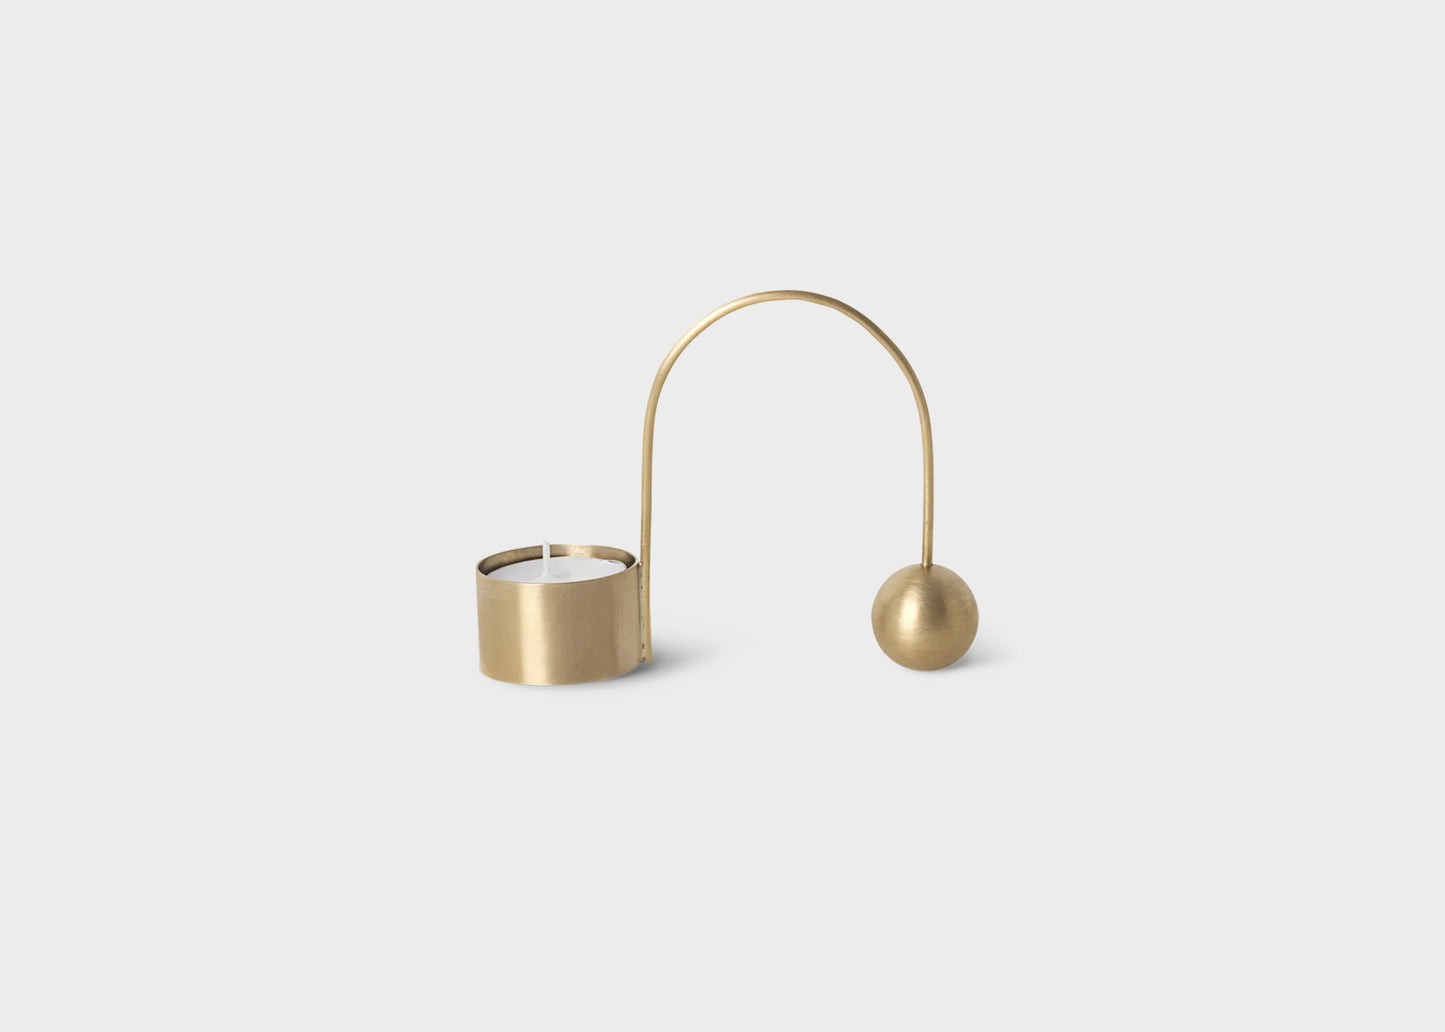 A golden brass balance tealight candle holder by Ferm Living with a tealight candle in it.